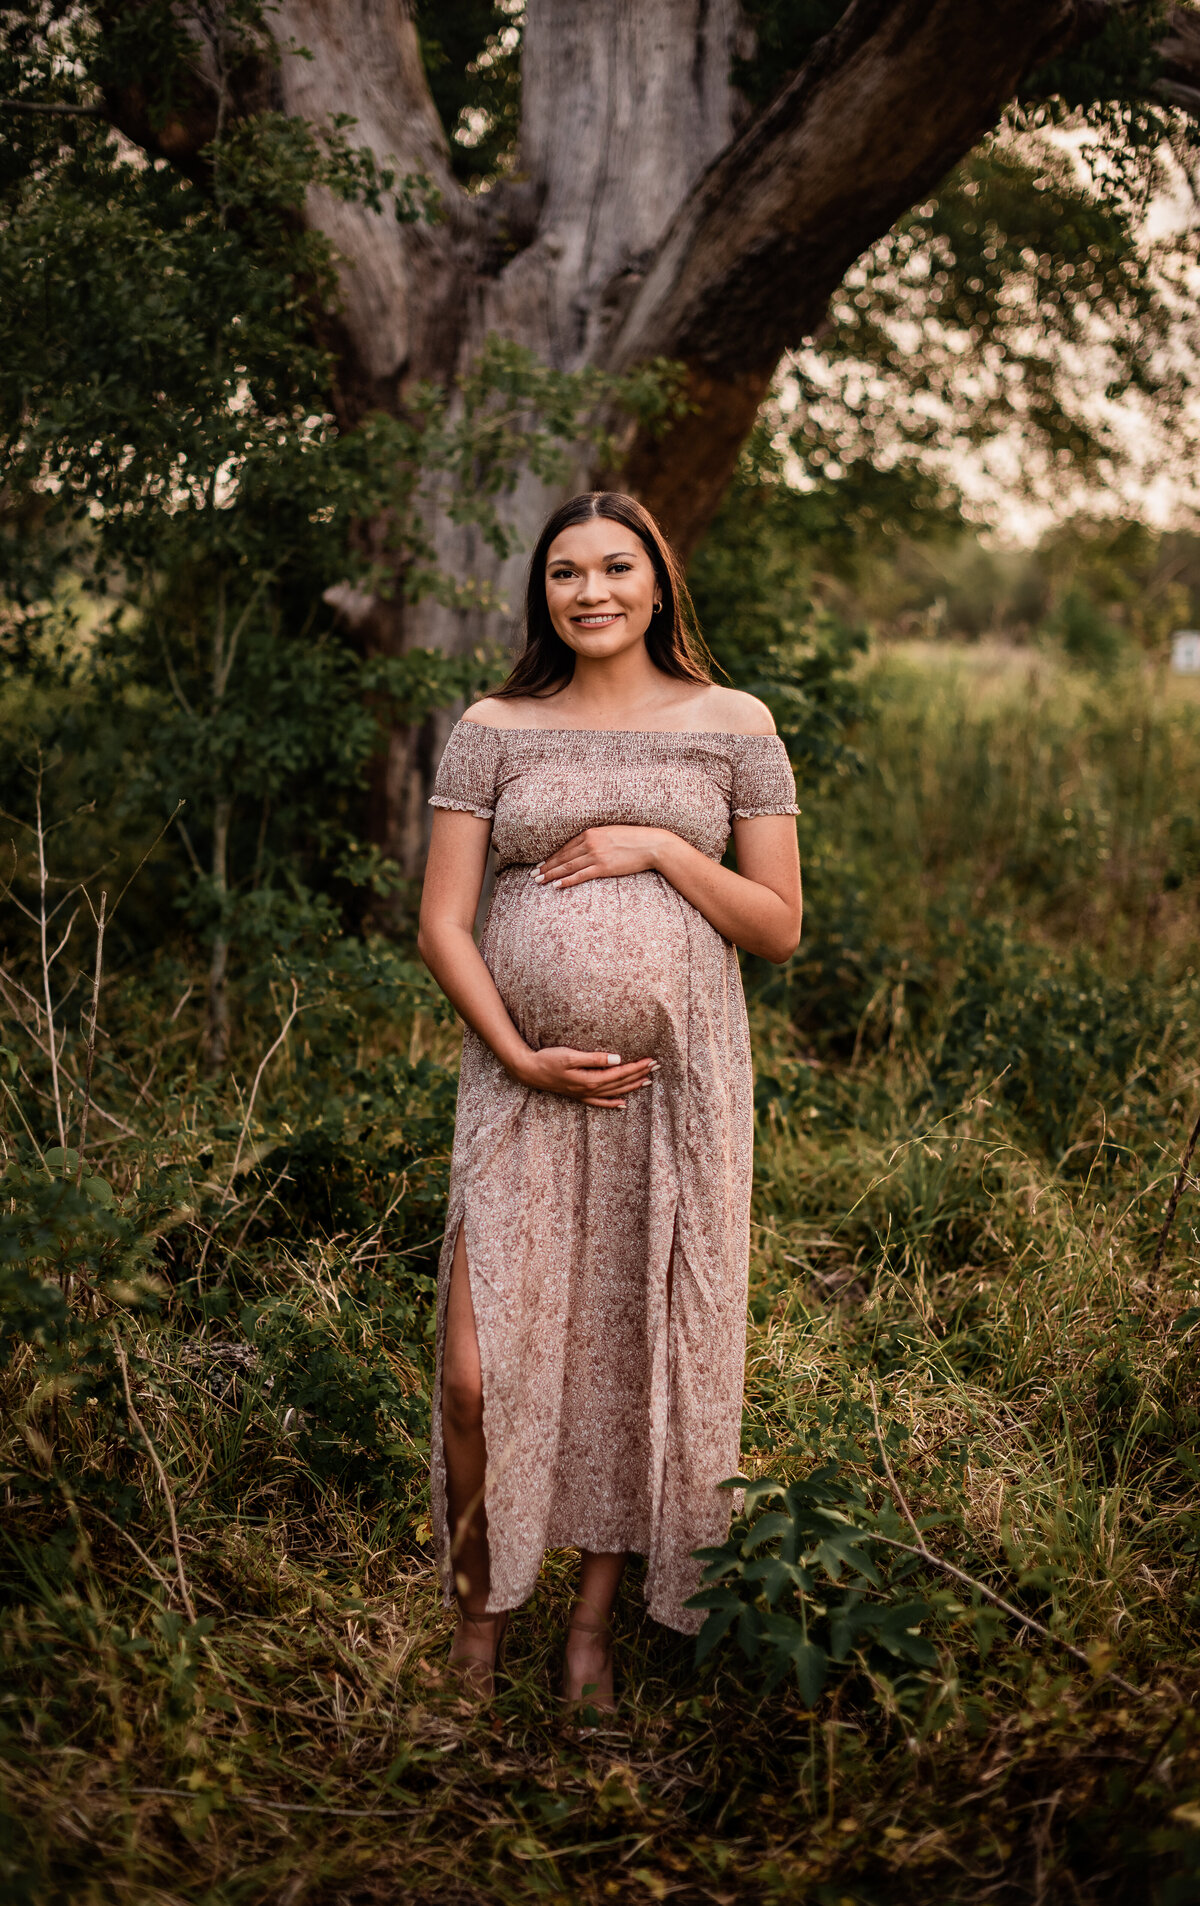 An expectant mom stands straight to the camera and cups her baby bump while she smiles toward the camera.